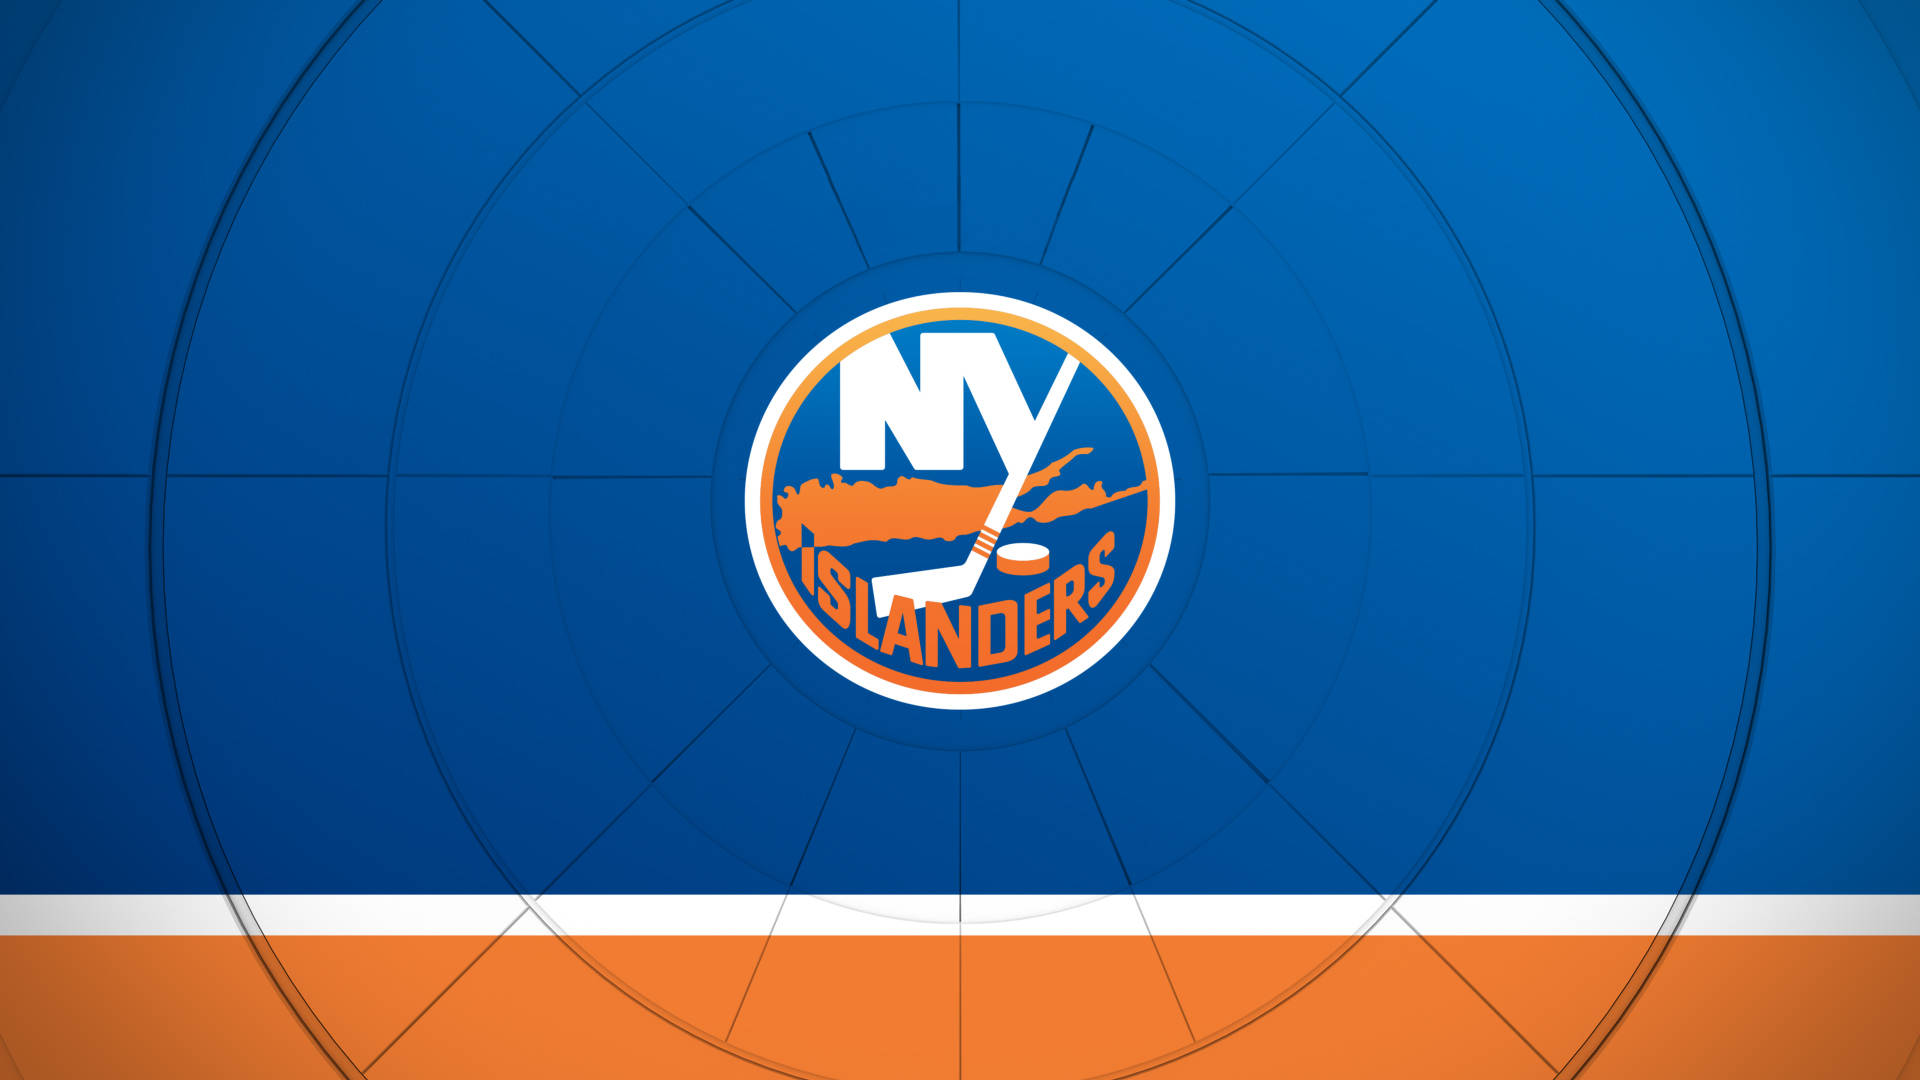 Combined New York Rangers And Islander Background